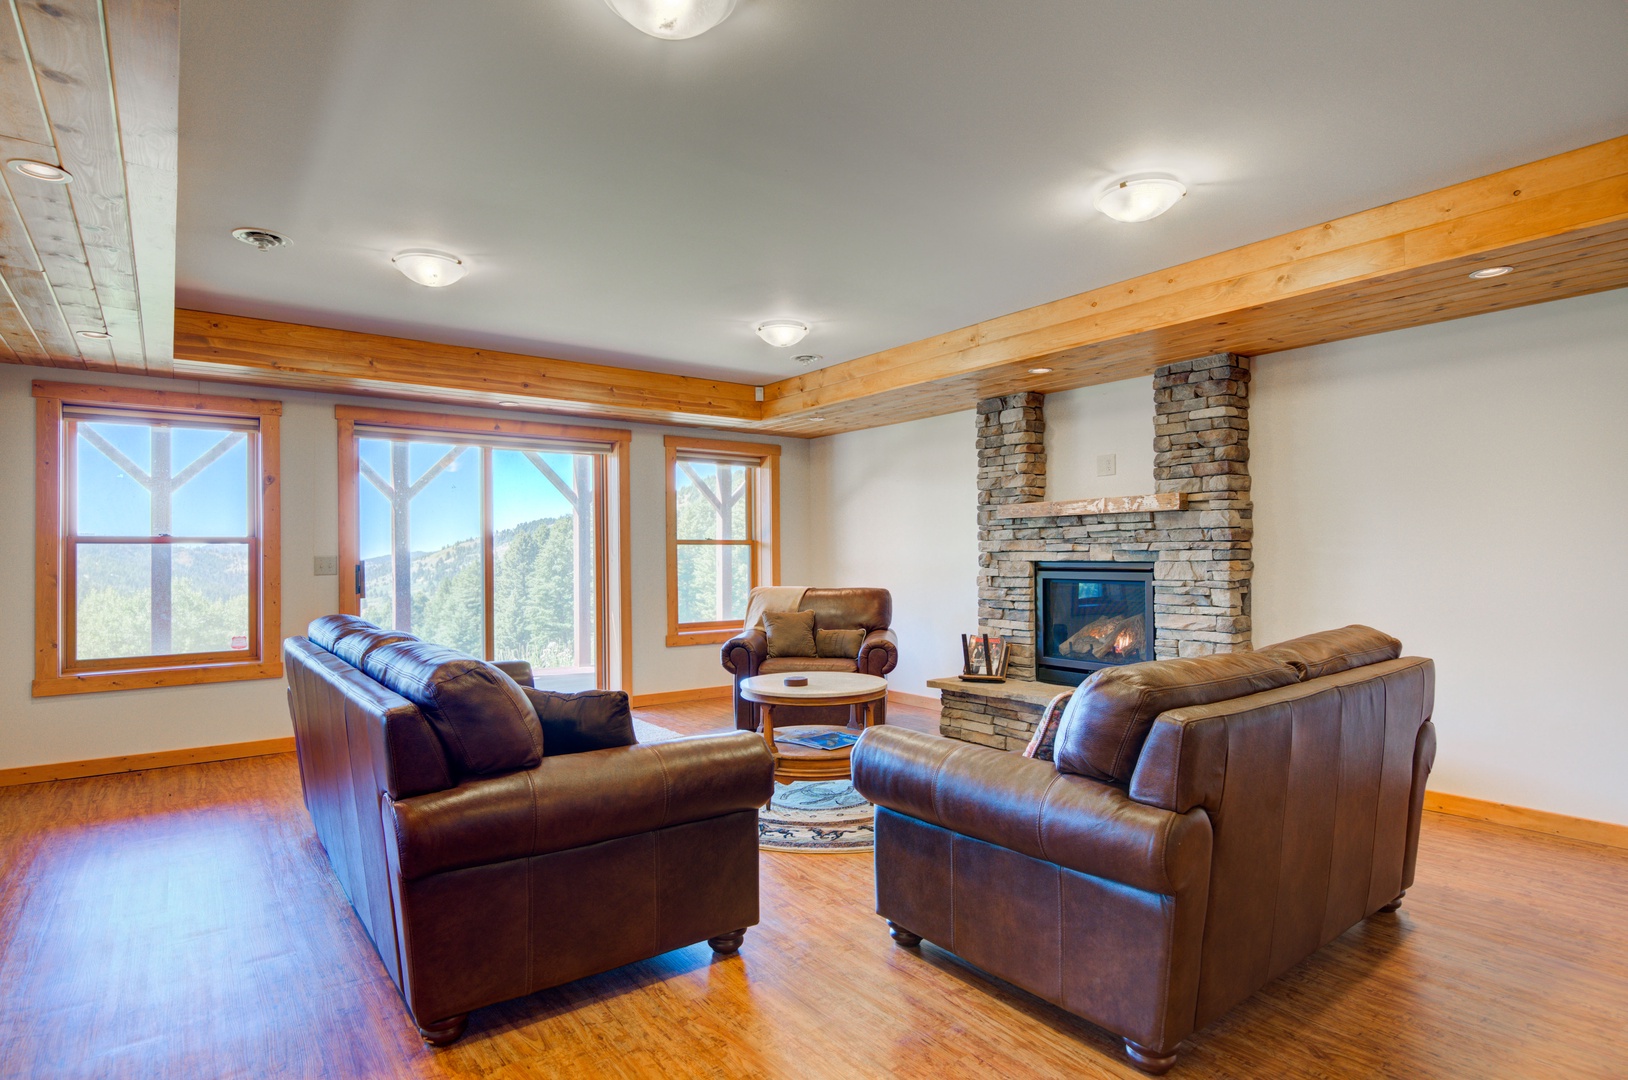 Bozeman Vacation Rentals, The Canyon Lookout - Home away from home